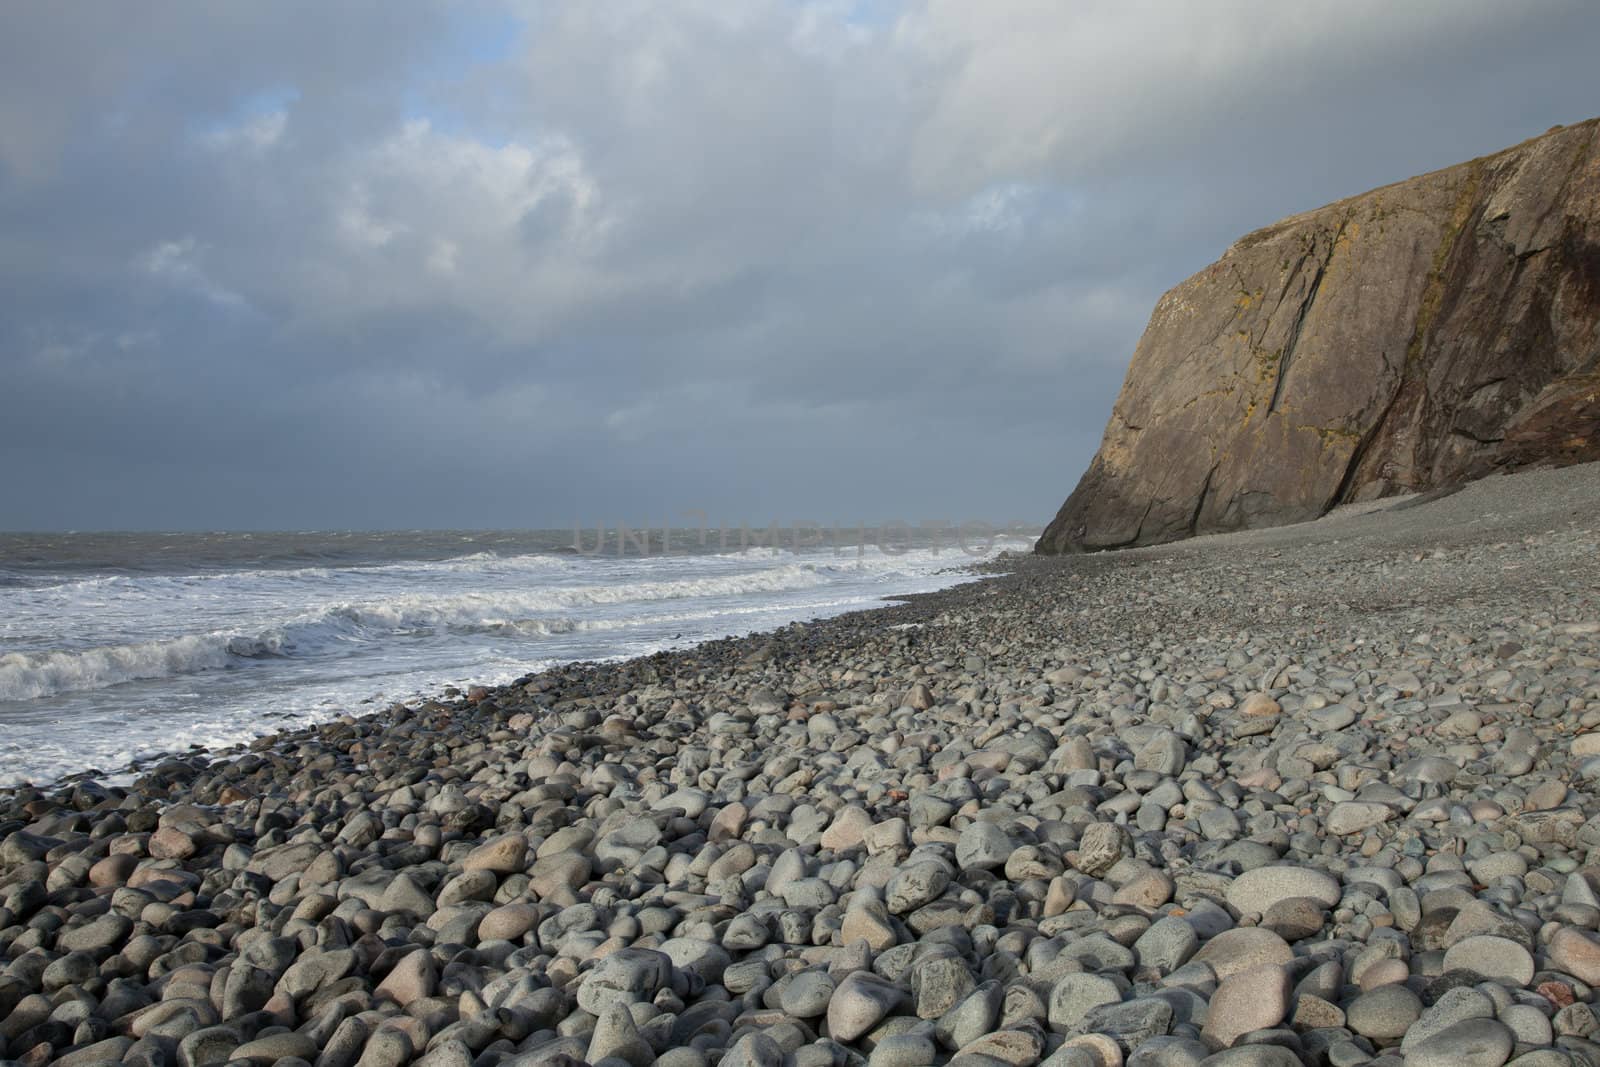 A pebble beach leads to a shale cliff with waves breaking on the shore and a cloudy sky in the distance.